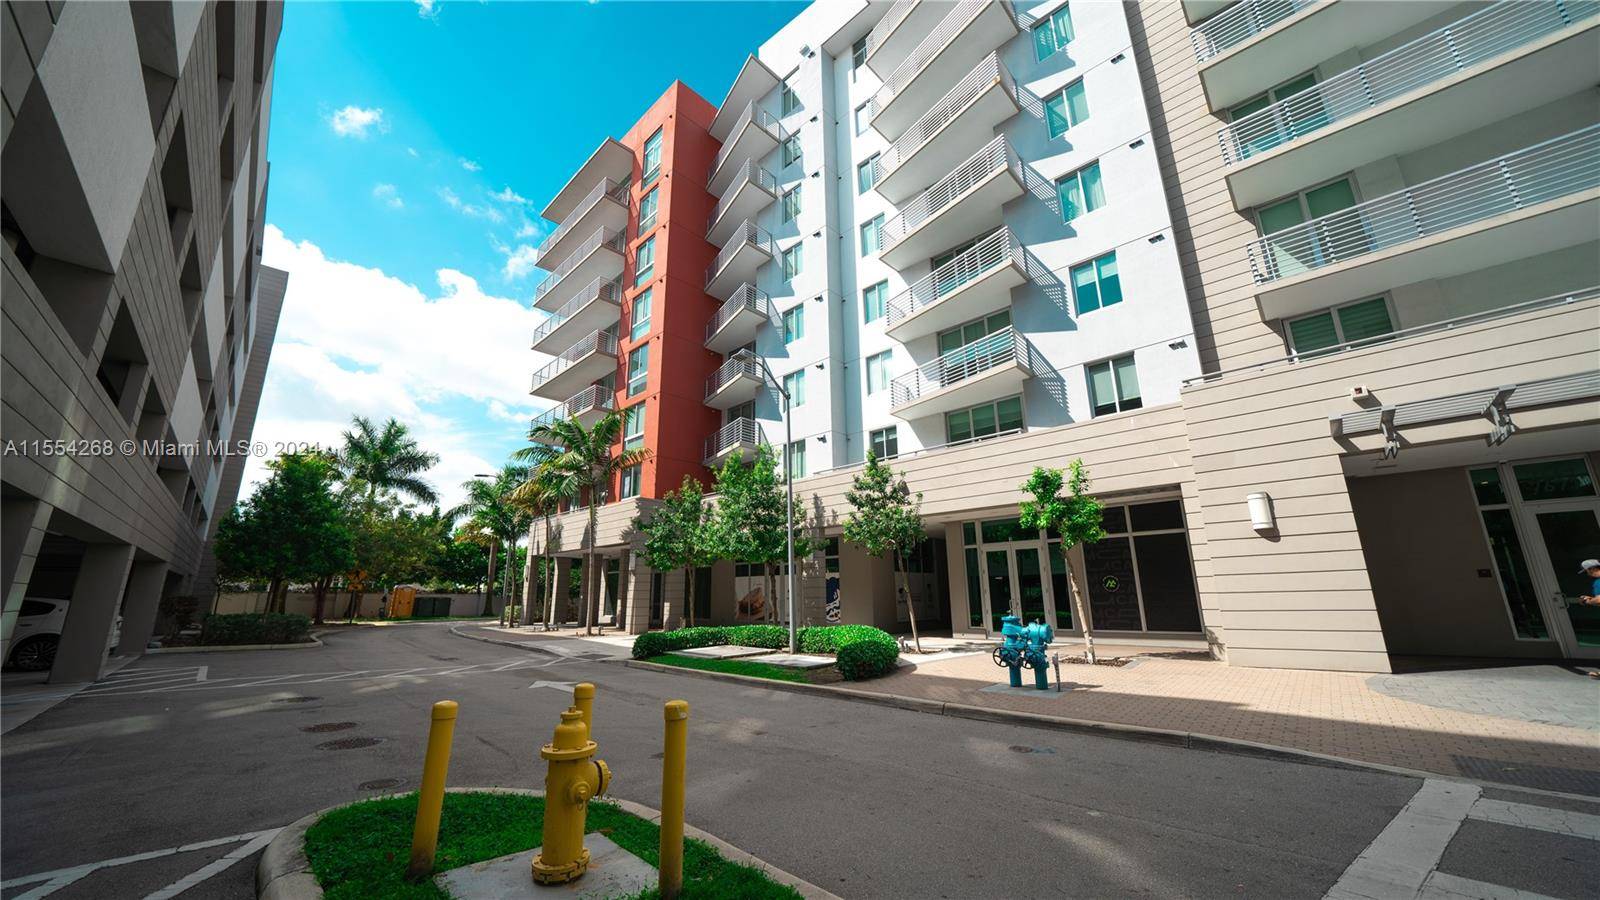 CORNER UNIT Located in the heart of the city of Doral, FL, this 3 bedroom, 3.